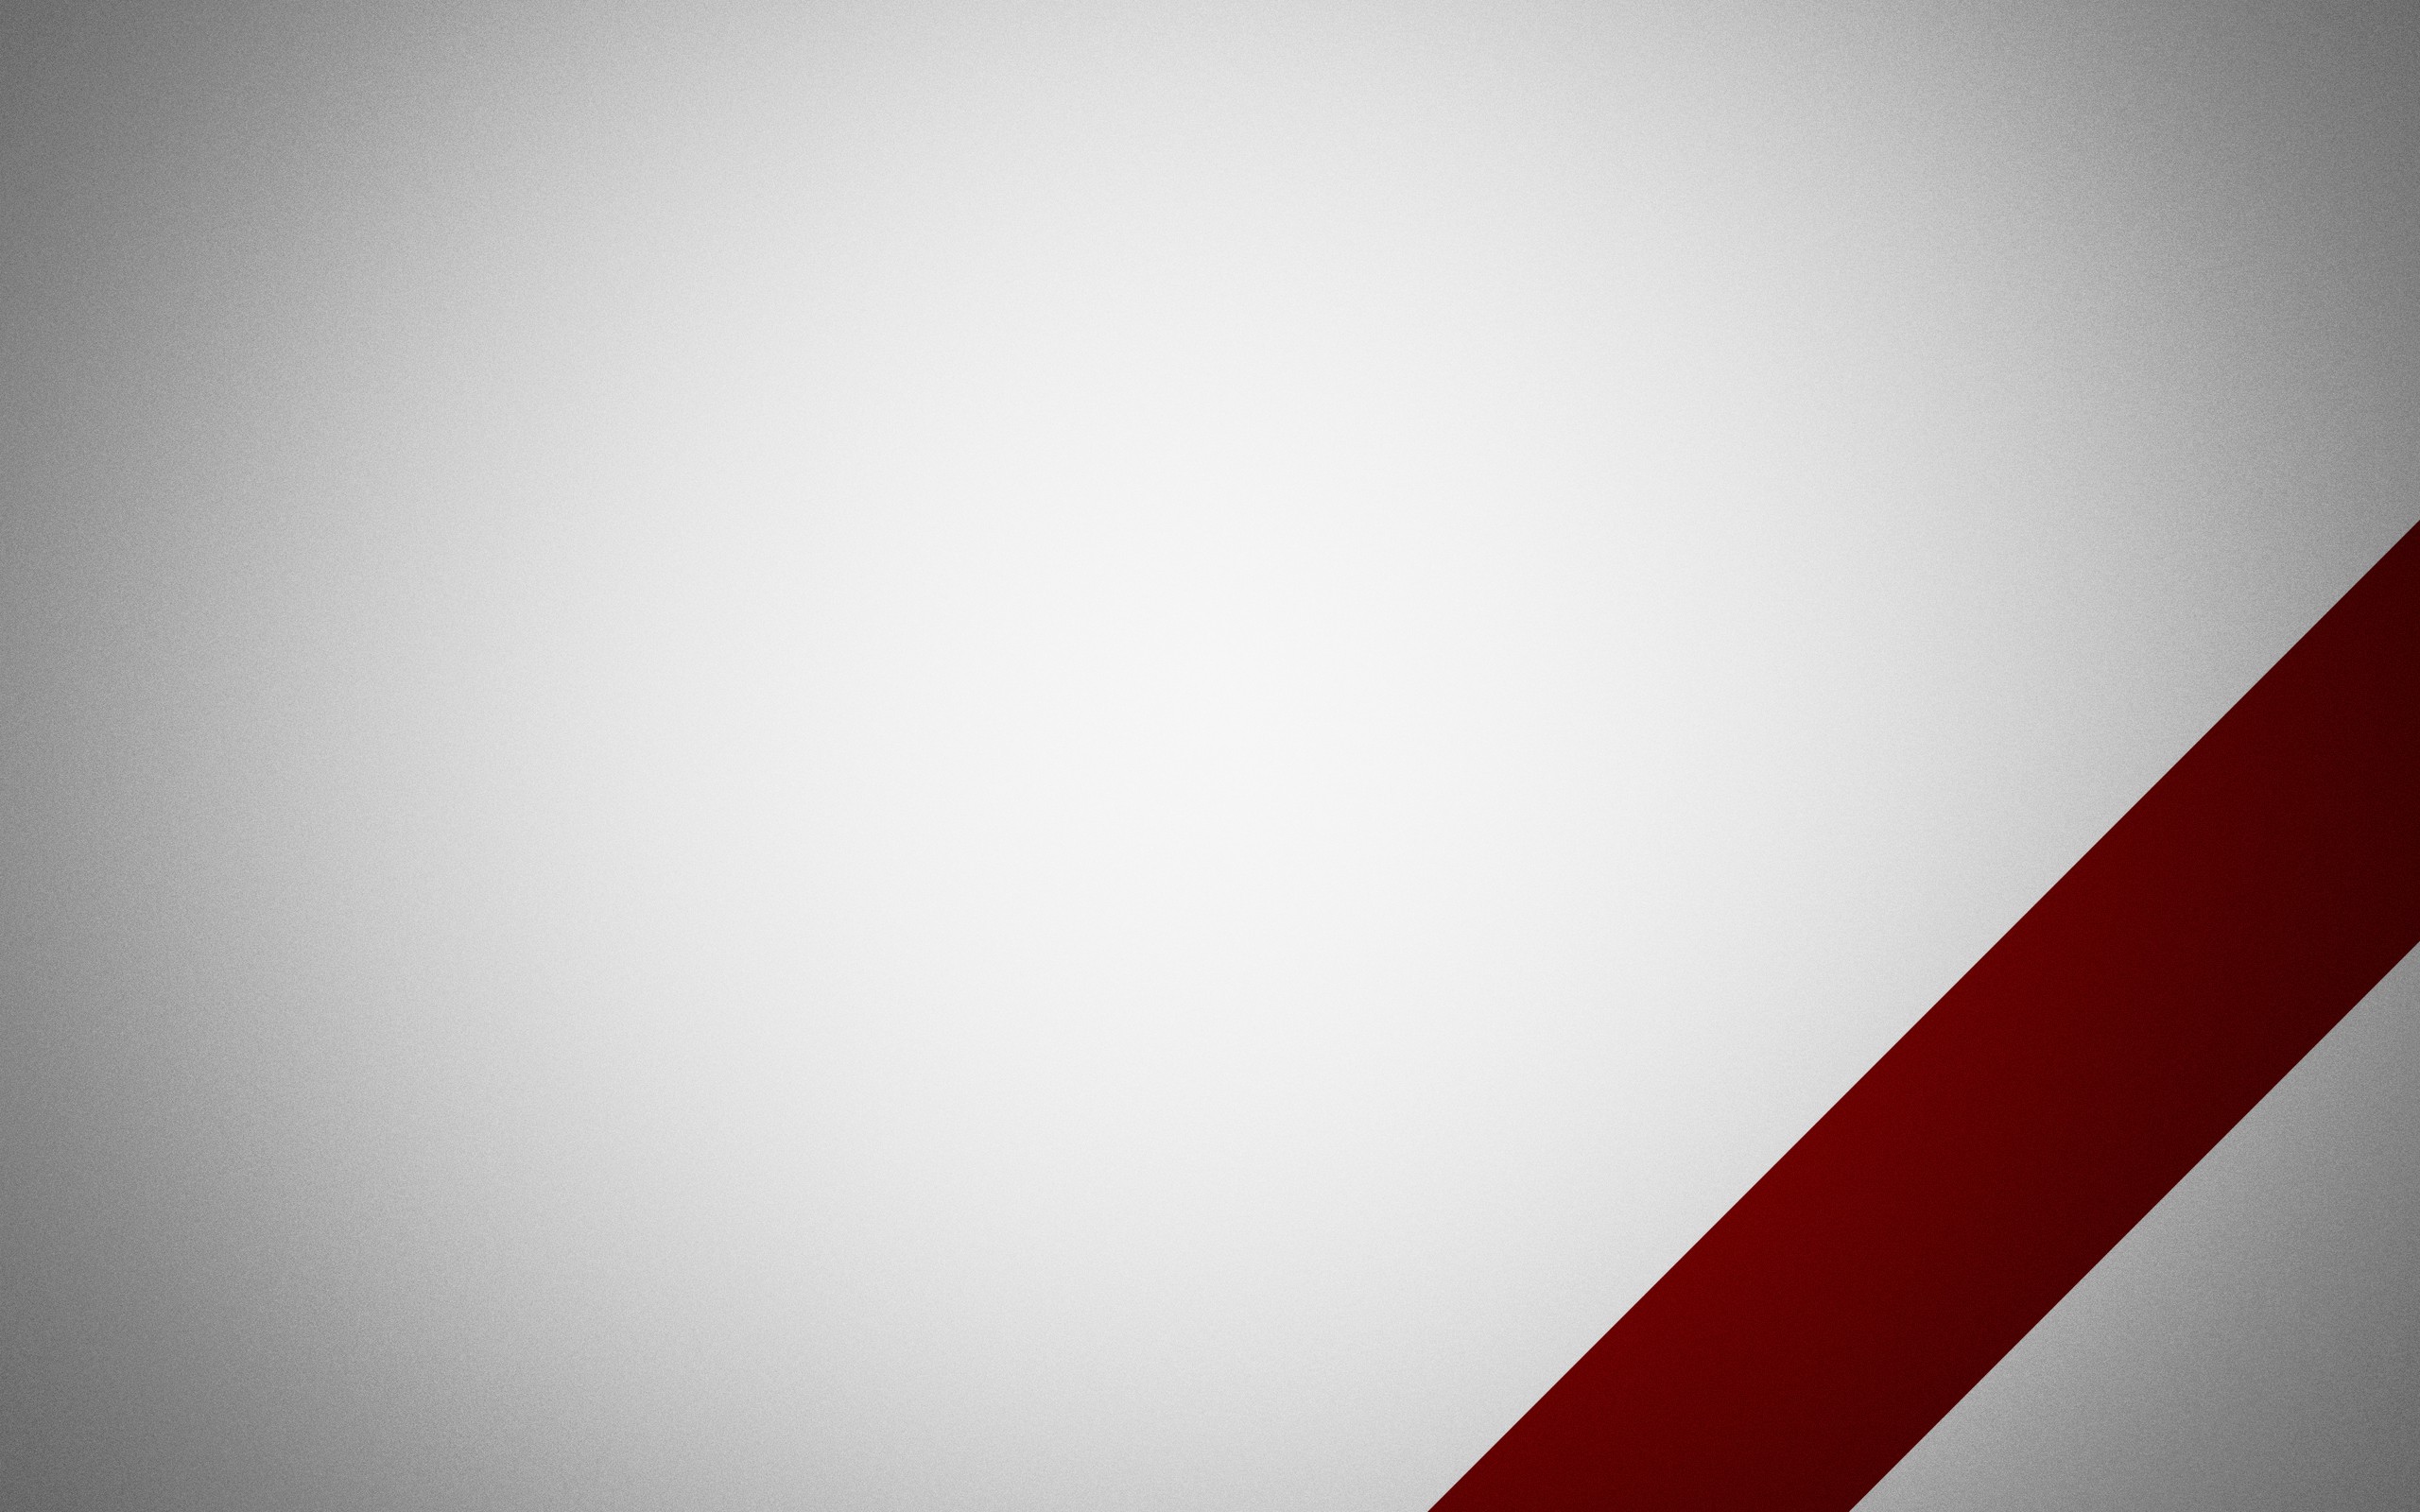 2560x1600 Red and White desktop PC and Mac wallpaper